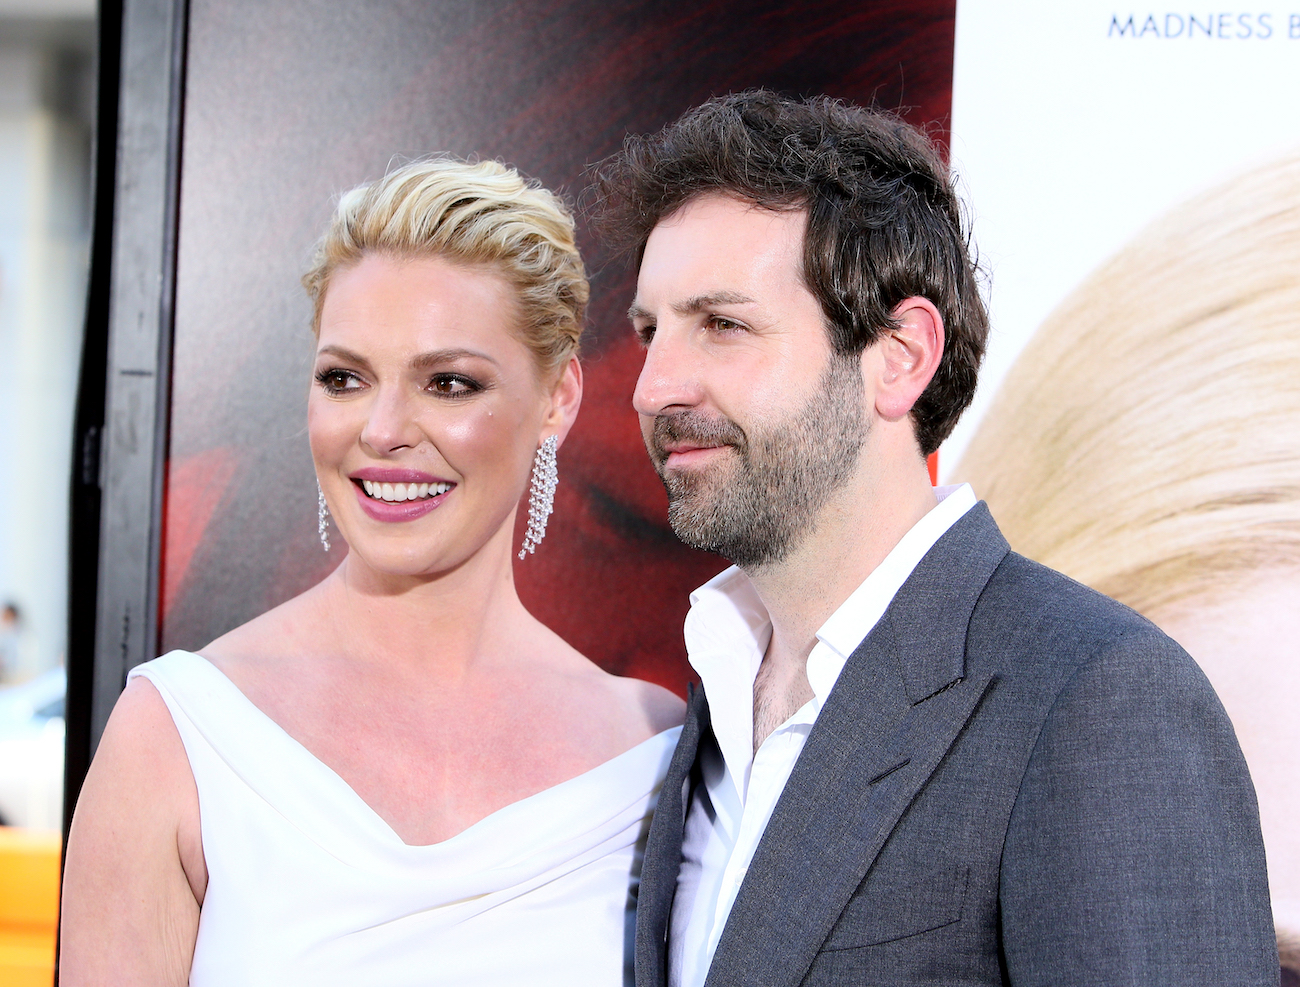 Katherine Heigl (L) and Josh Kelley attend the premiere of Warner Bros. Pictures' "Unforgettable" at TCL Chinese Theatre 